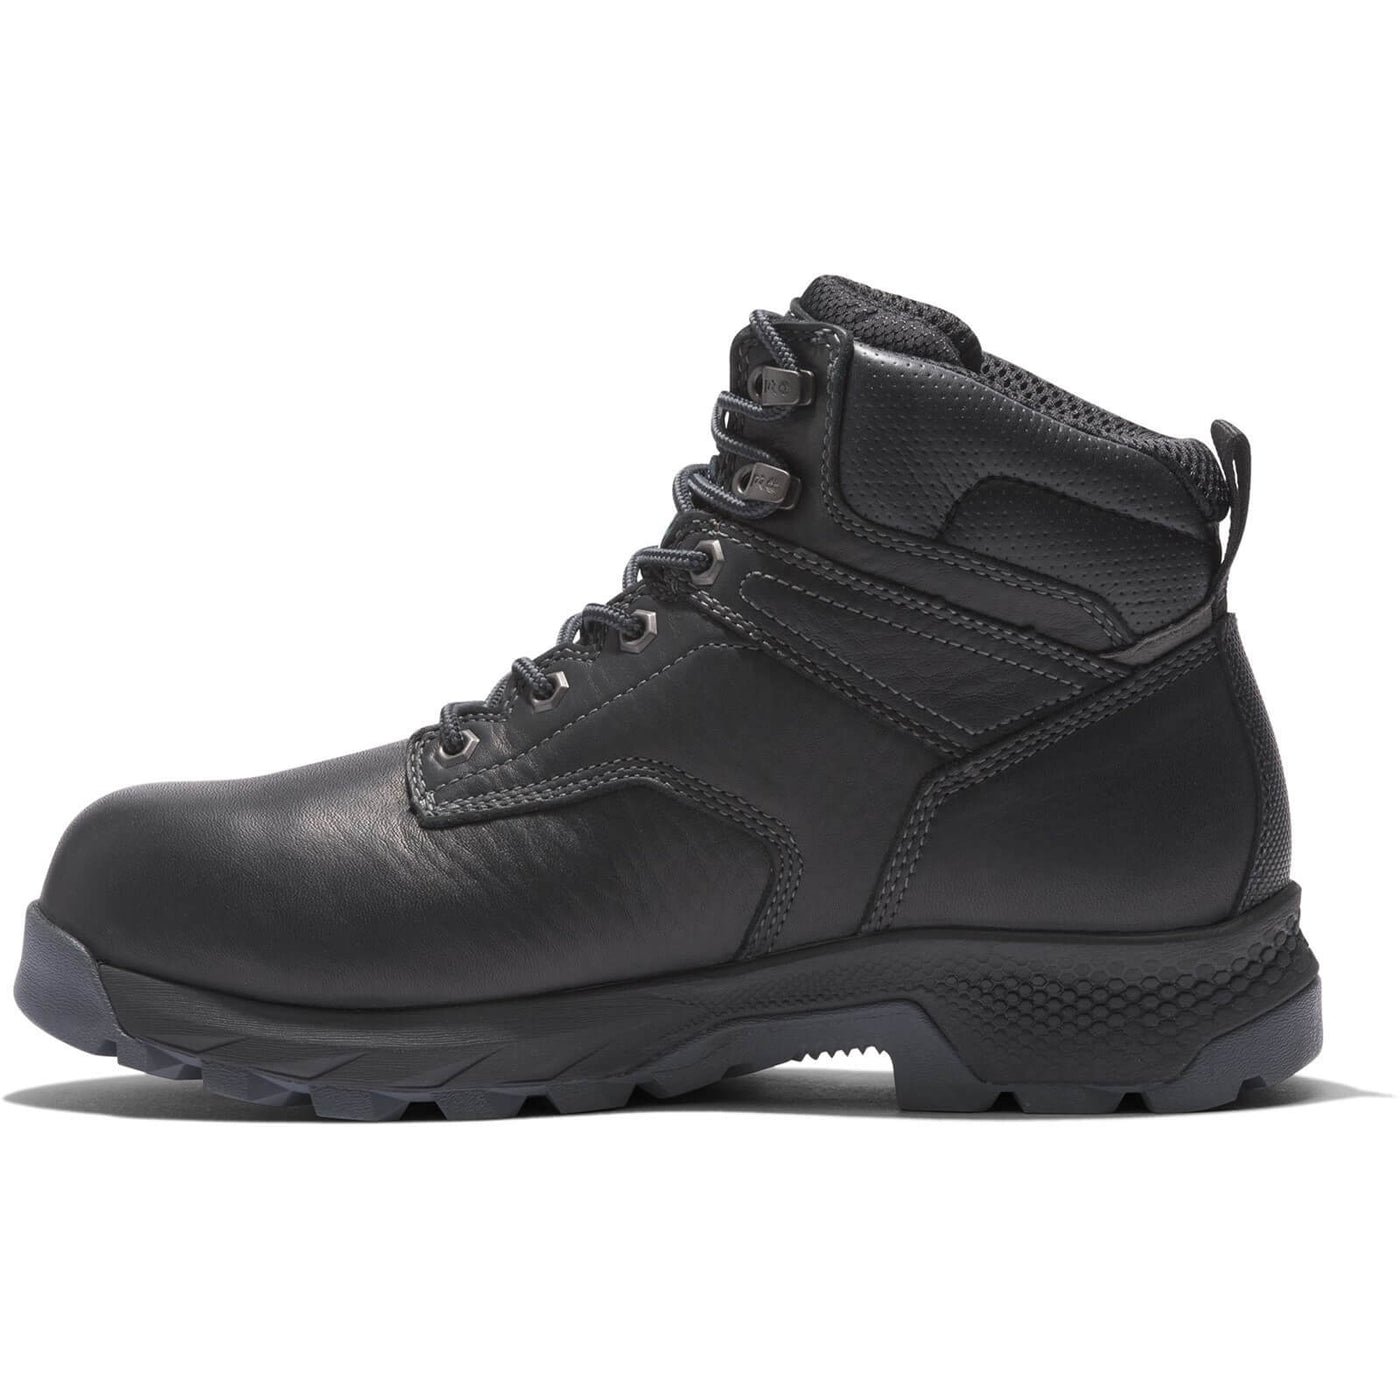 Timberland Pro Titan 6 Inch Lightweight Waterproof S3 Safety Boots Black 6#colour_black